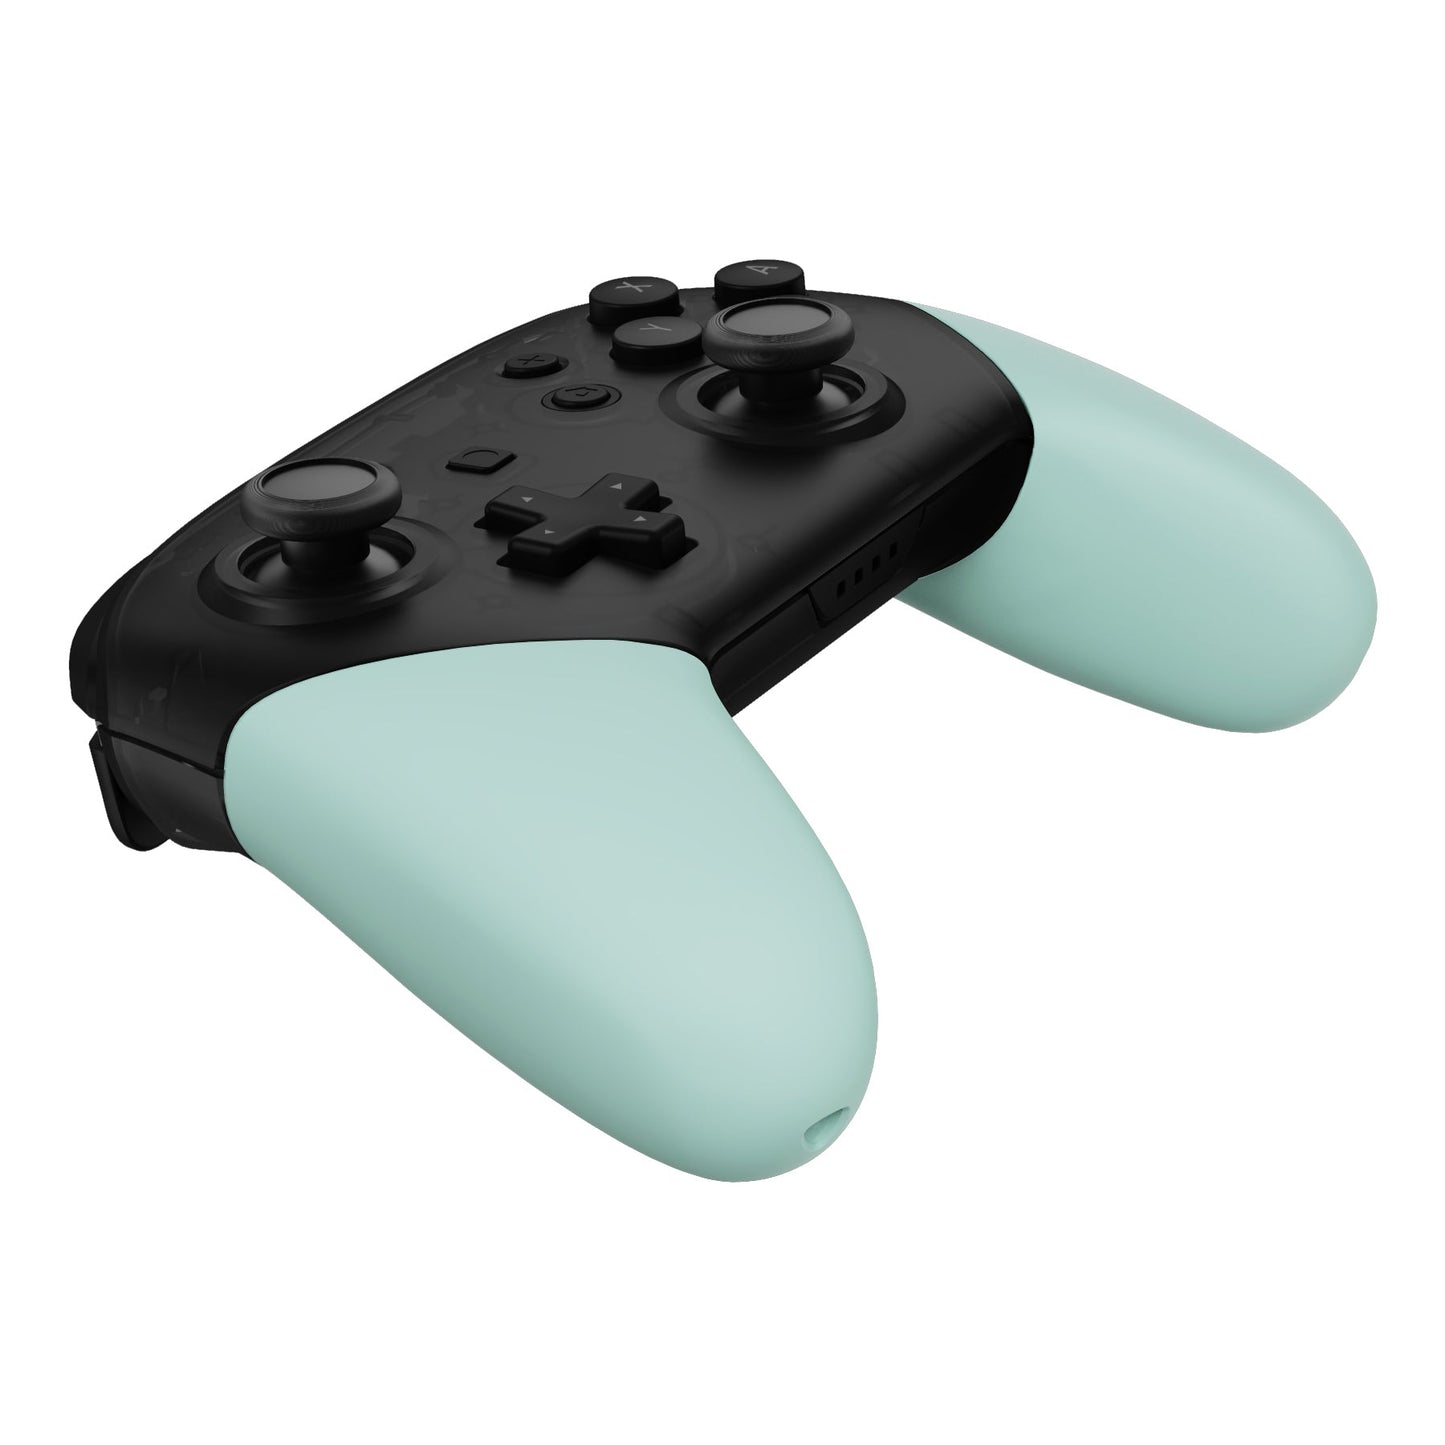 eXtremeRate Retail Light Cyan Replacement Handle Grips for NS Switch Pro Controller, Soft Touch DIY Hand Grip Shell for NS Switch Pro Controller - Controller NOT Included - GRP327